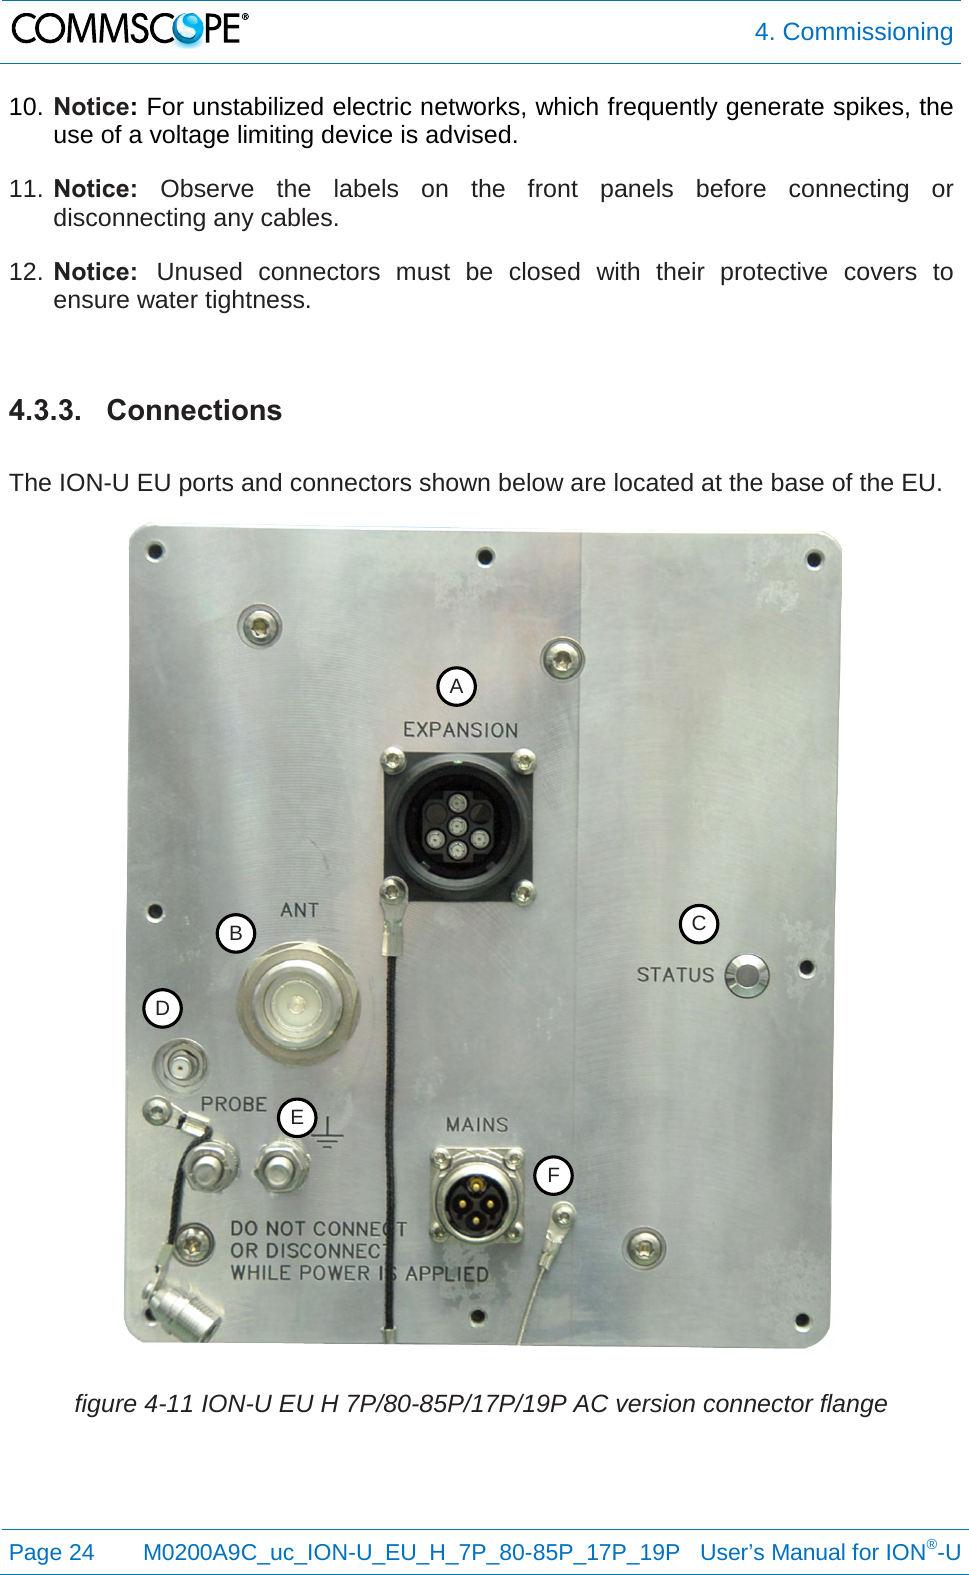  4. Commissioning  Page 24 M0200A9C_uc_ION-U_EU_H_7P_80-85P_17P_19P   User’s Manual for ION®-U  10. Notice: For unstabilized electric networks, which frequently generate spikes, the use of a voltage limiting device is advised. 11. Notice: Observe the labels on the front panels before connecting or disconnecting any cables. 12. Notice: Unused connectors must be closed with their protective covers to ensure water tightness.  4.3.3. Connections  The ION-U EU ports and connectors shown below are located at the base of the EU.   figure 4-11 ION-U EU H 7P/80-85P/17P/19P AC version connector flange    A B C D E F 